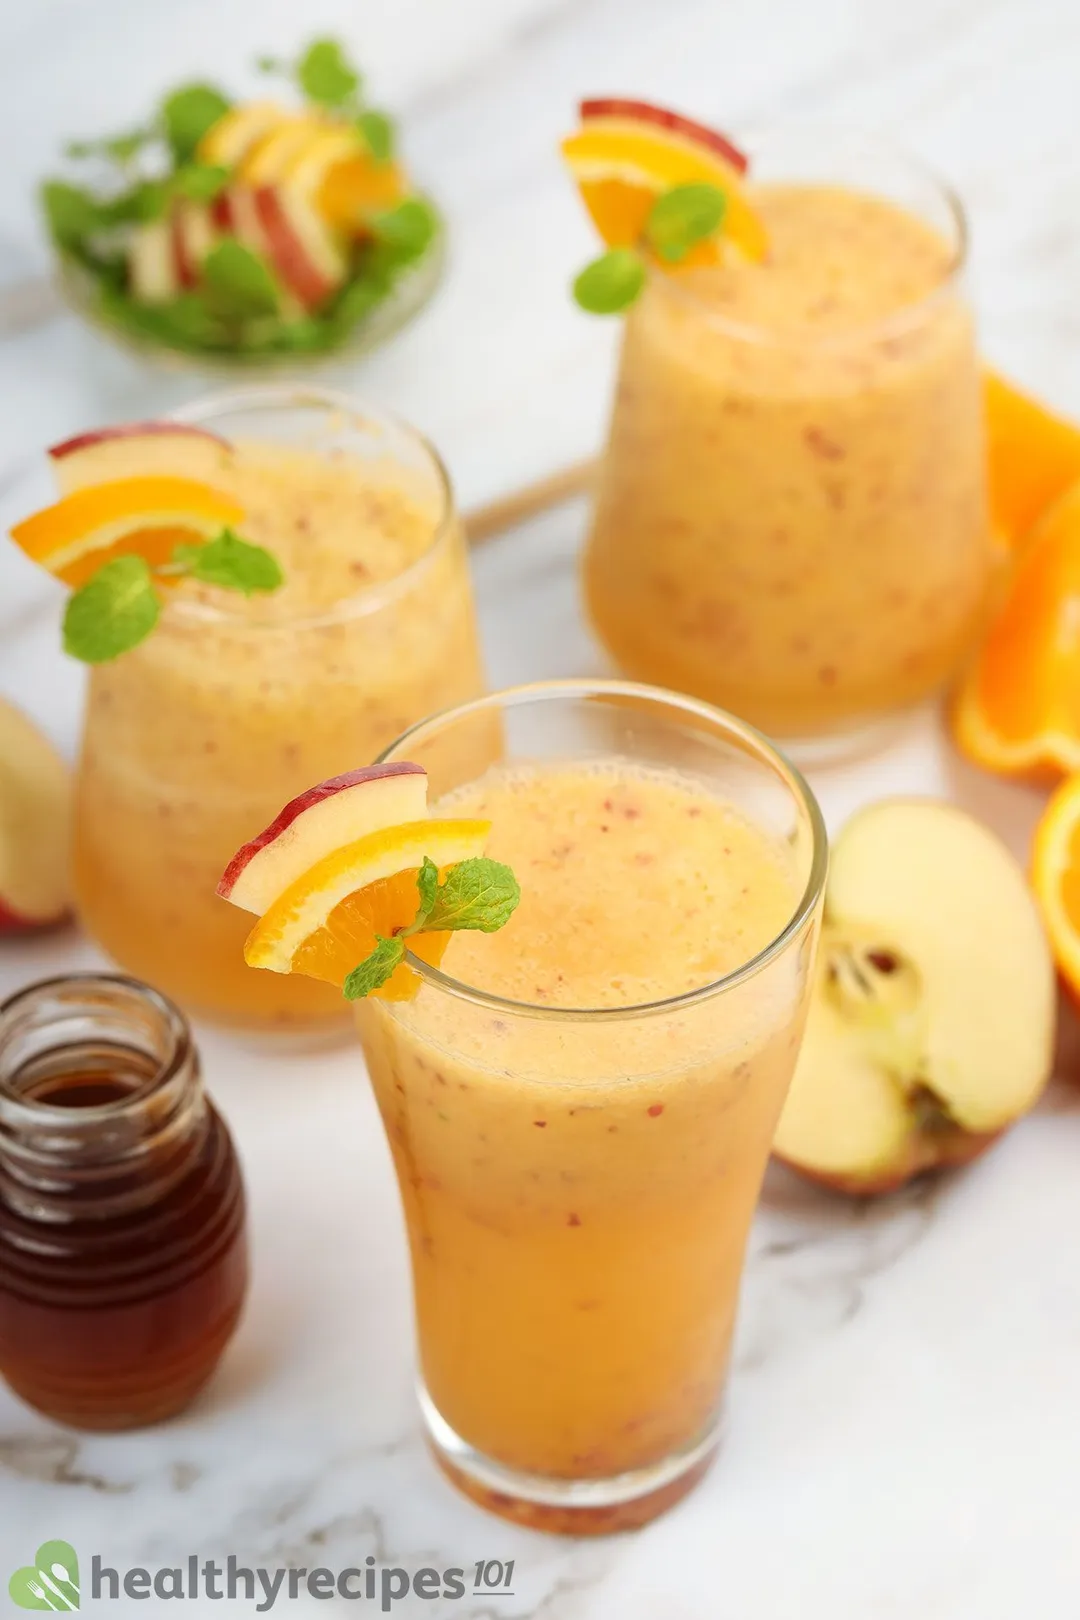 Three glasses of apple orange smoothie laid near a small jar of honey, half an apple, and some orange wedges.